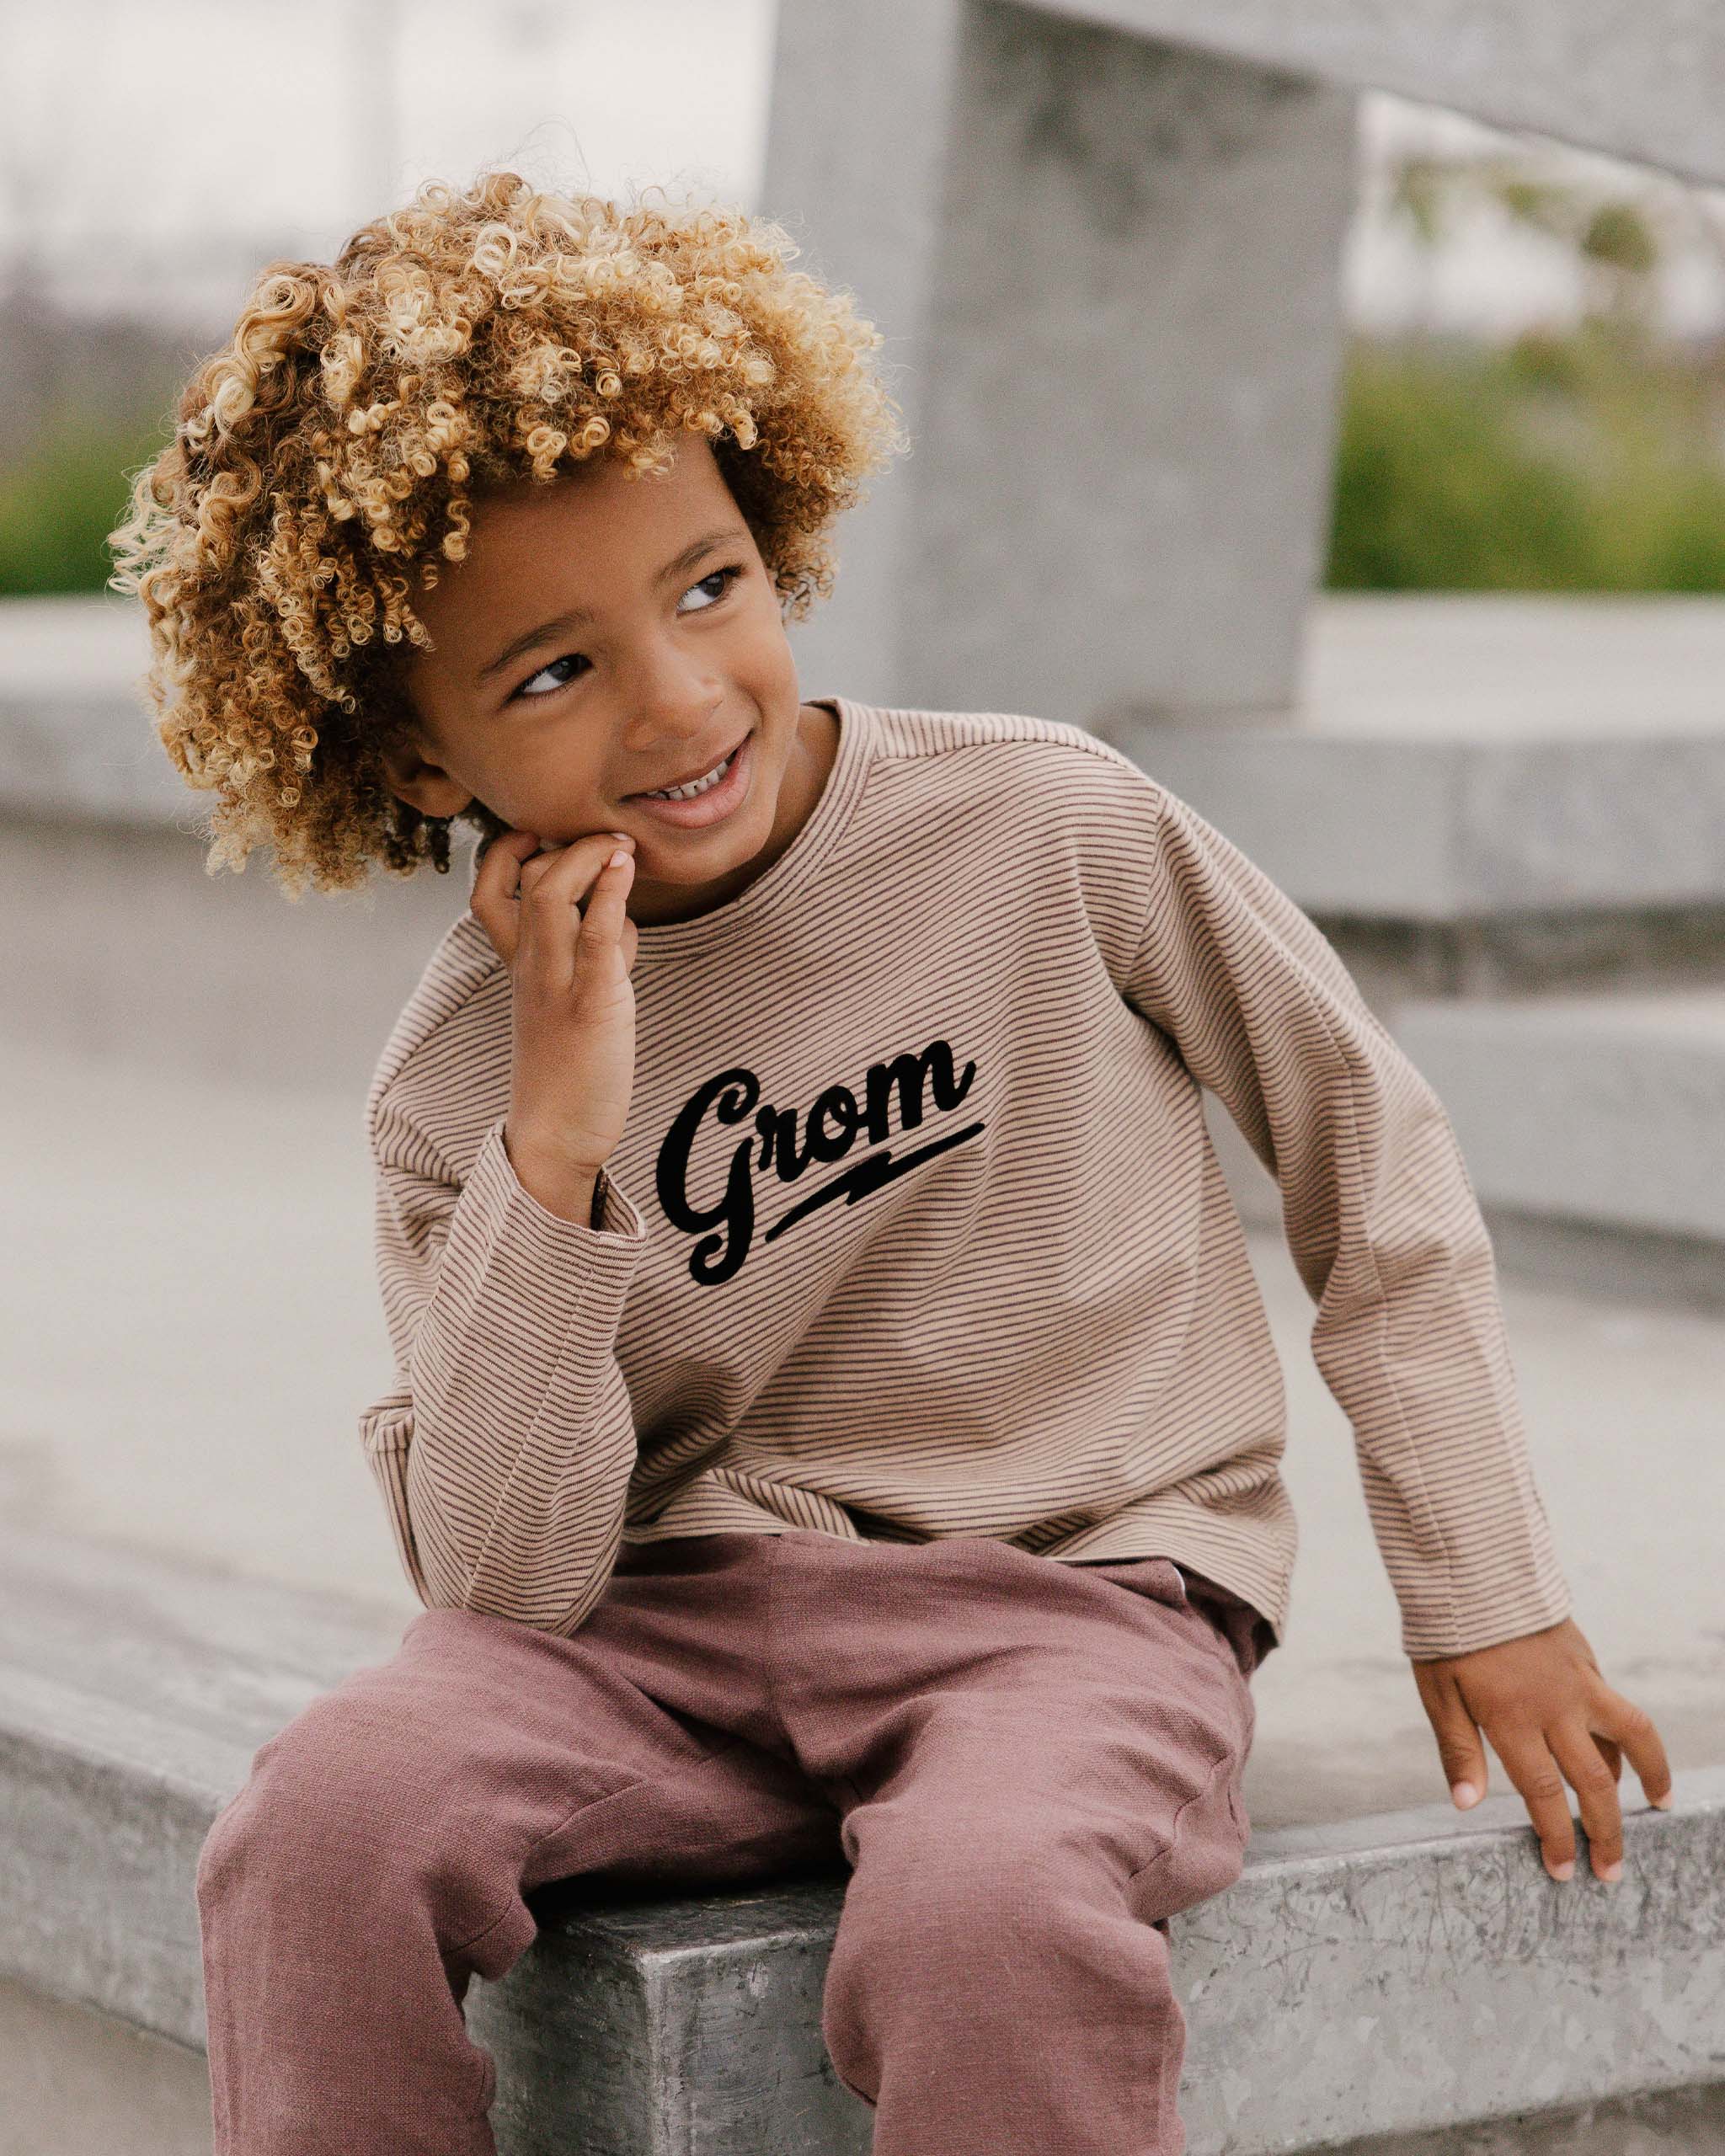 Long Sleeve Paneled Tee || Grom - Rylee + Cru | Kids Clothes | Trendy Baby Clothes | Modern Infant Outfits |